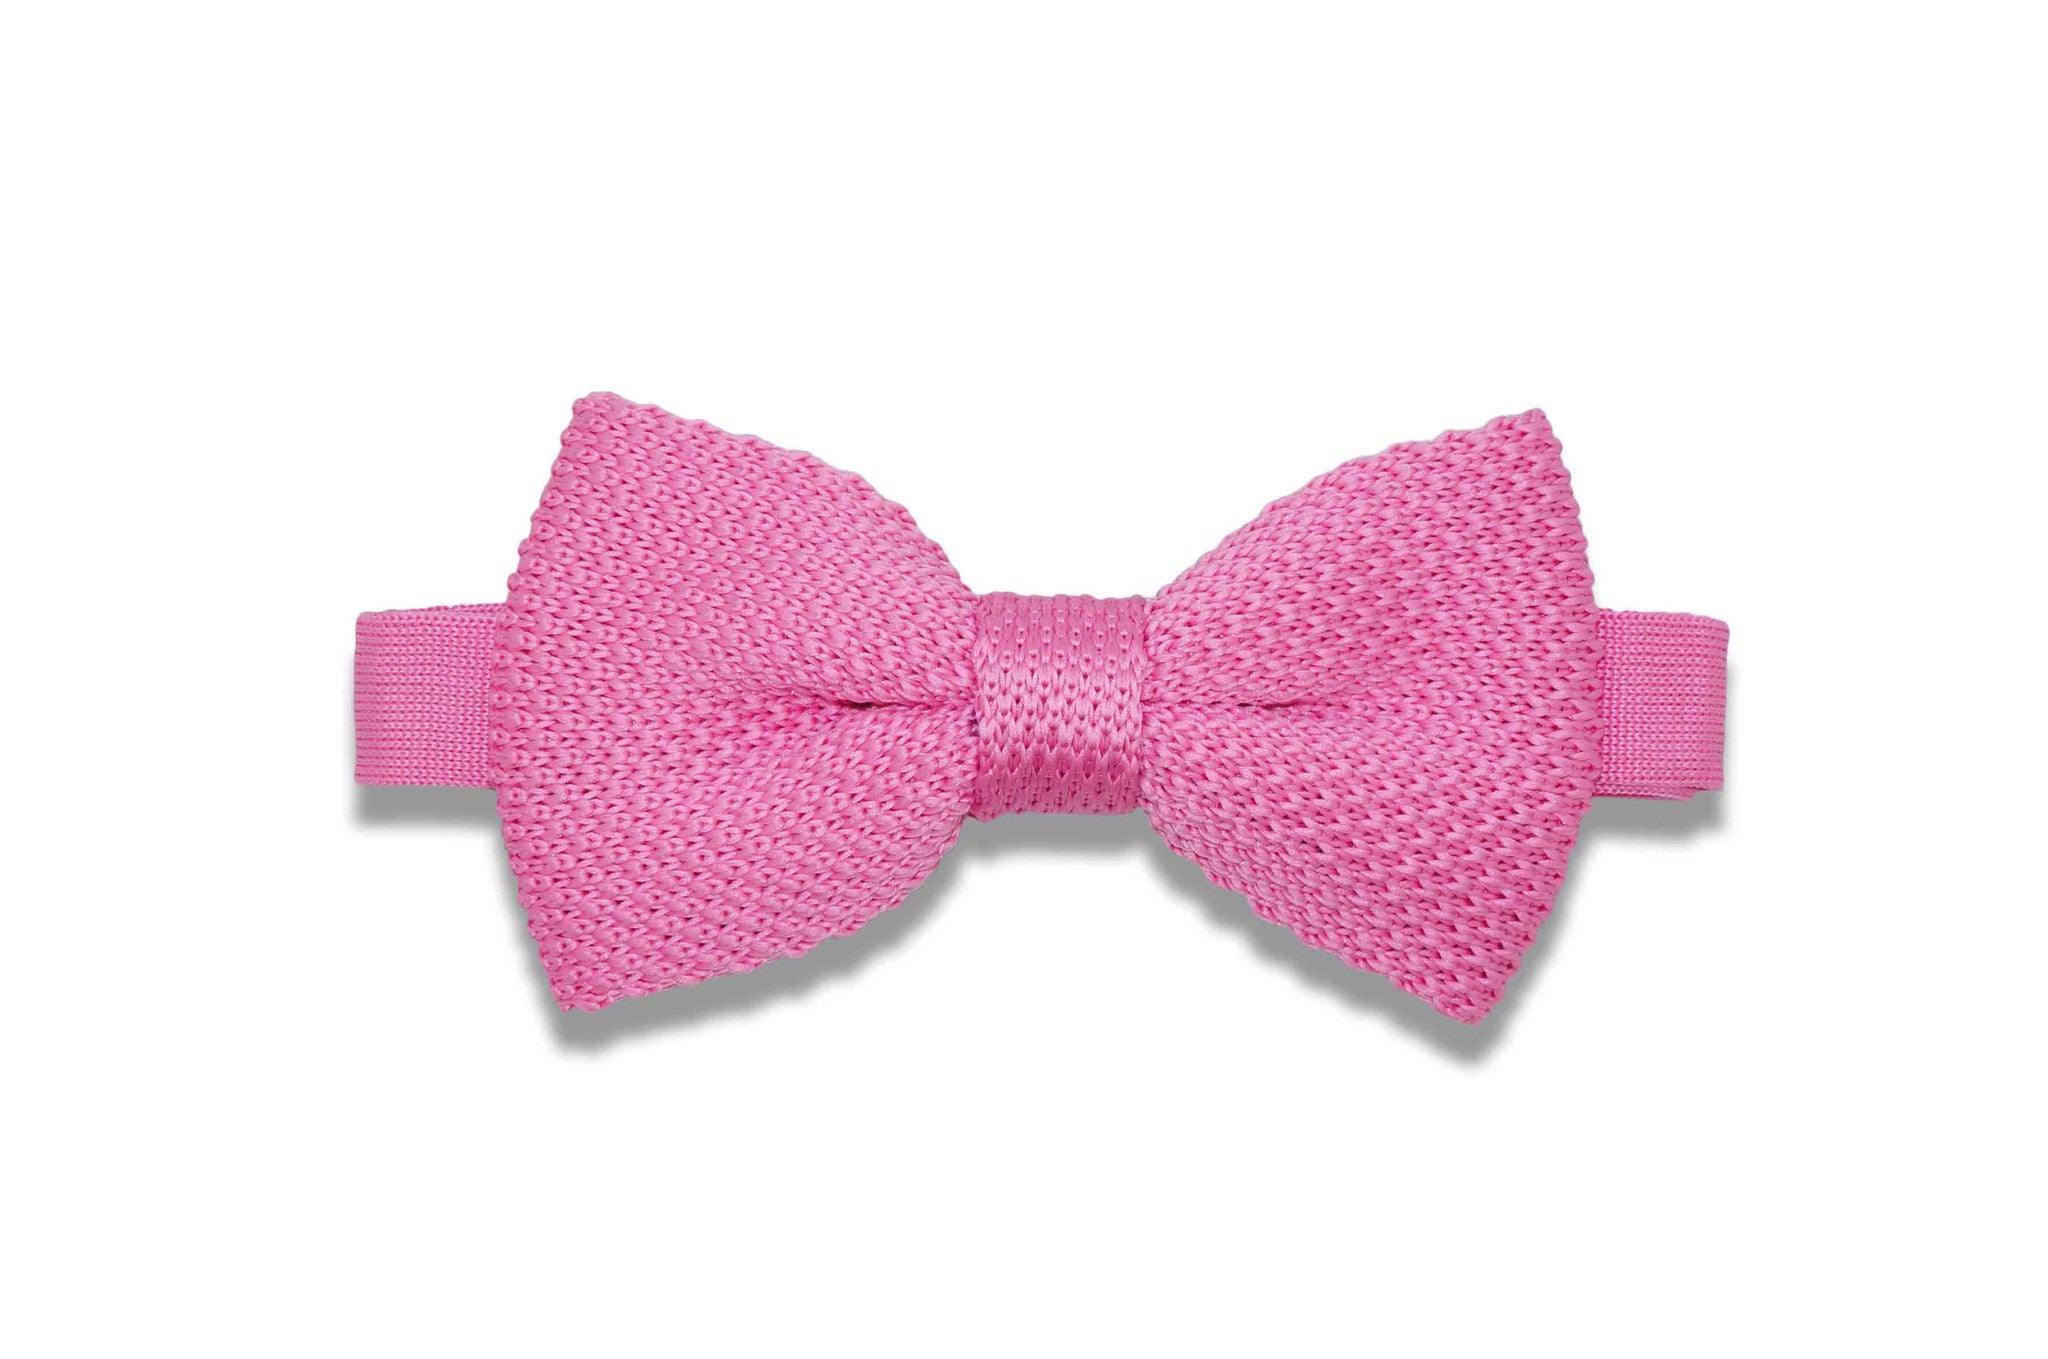 Cotton Candy Knitted Bow Tie (pre-tied) – Aristocrats Bows N Ties